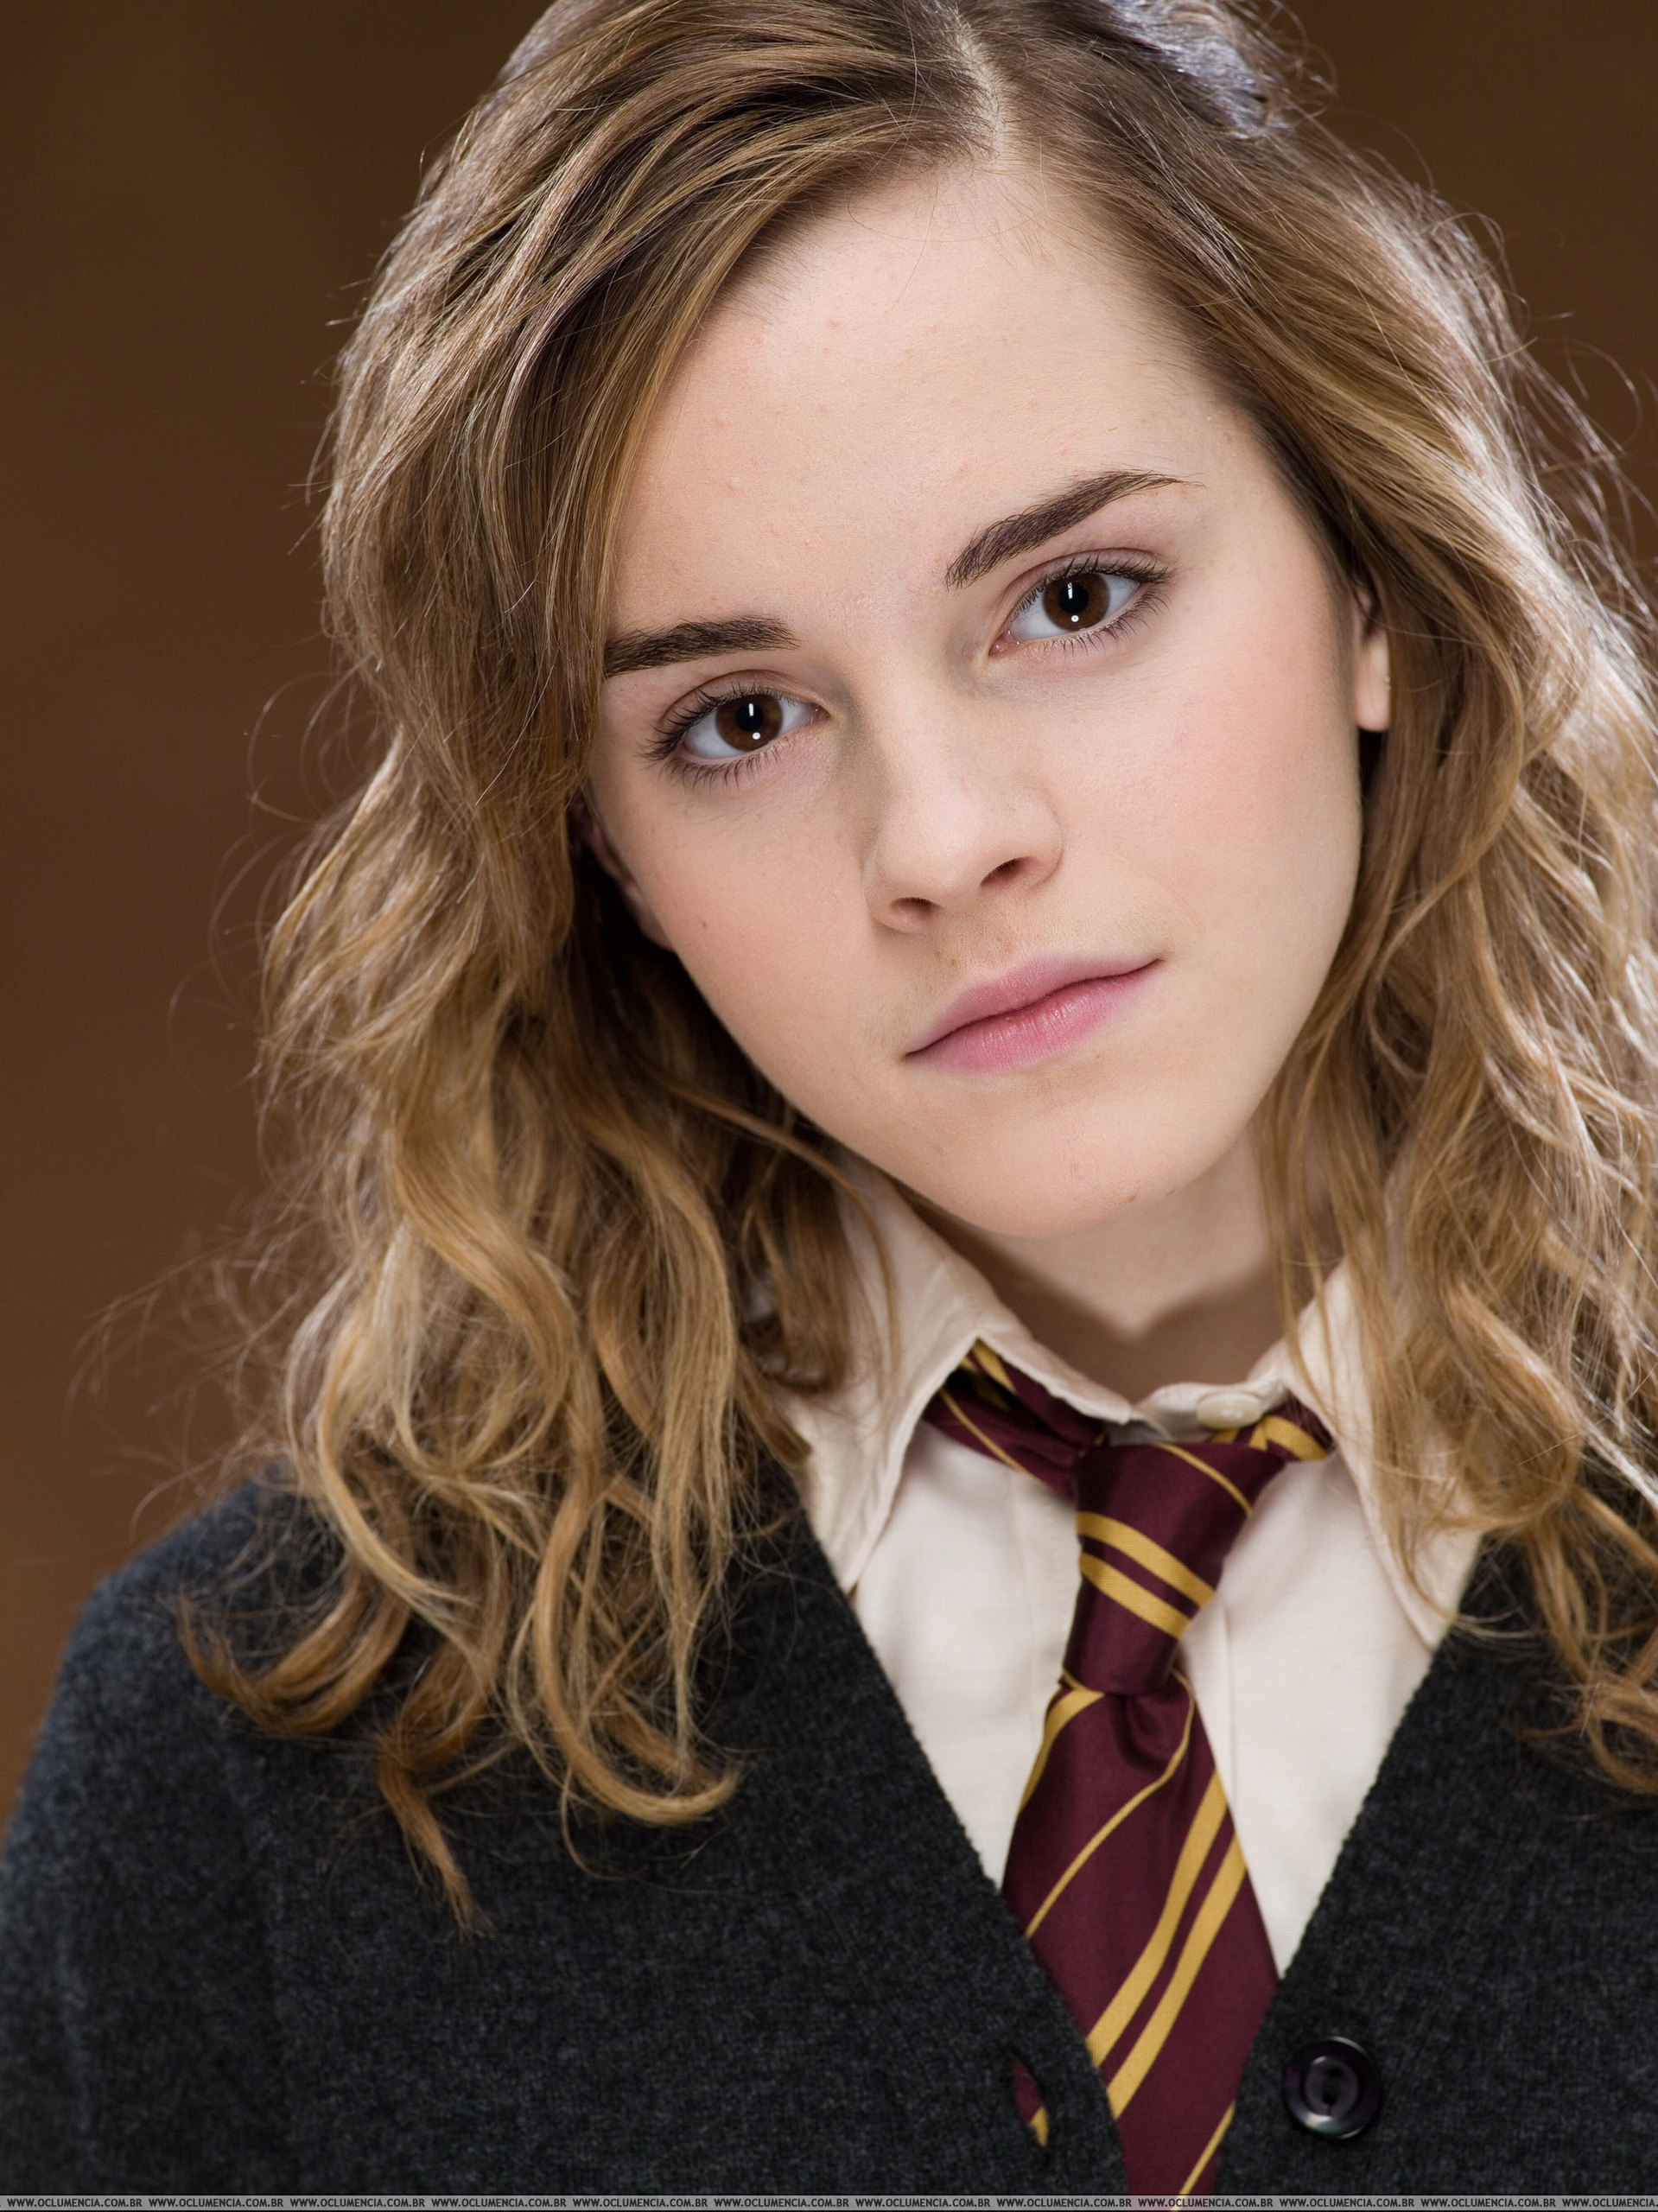 Emma Watson - Harry Potter and the Order of the Phoenix promoshoot